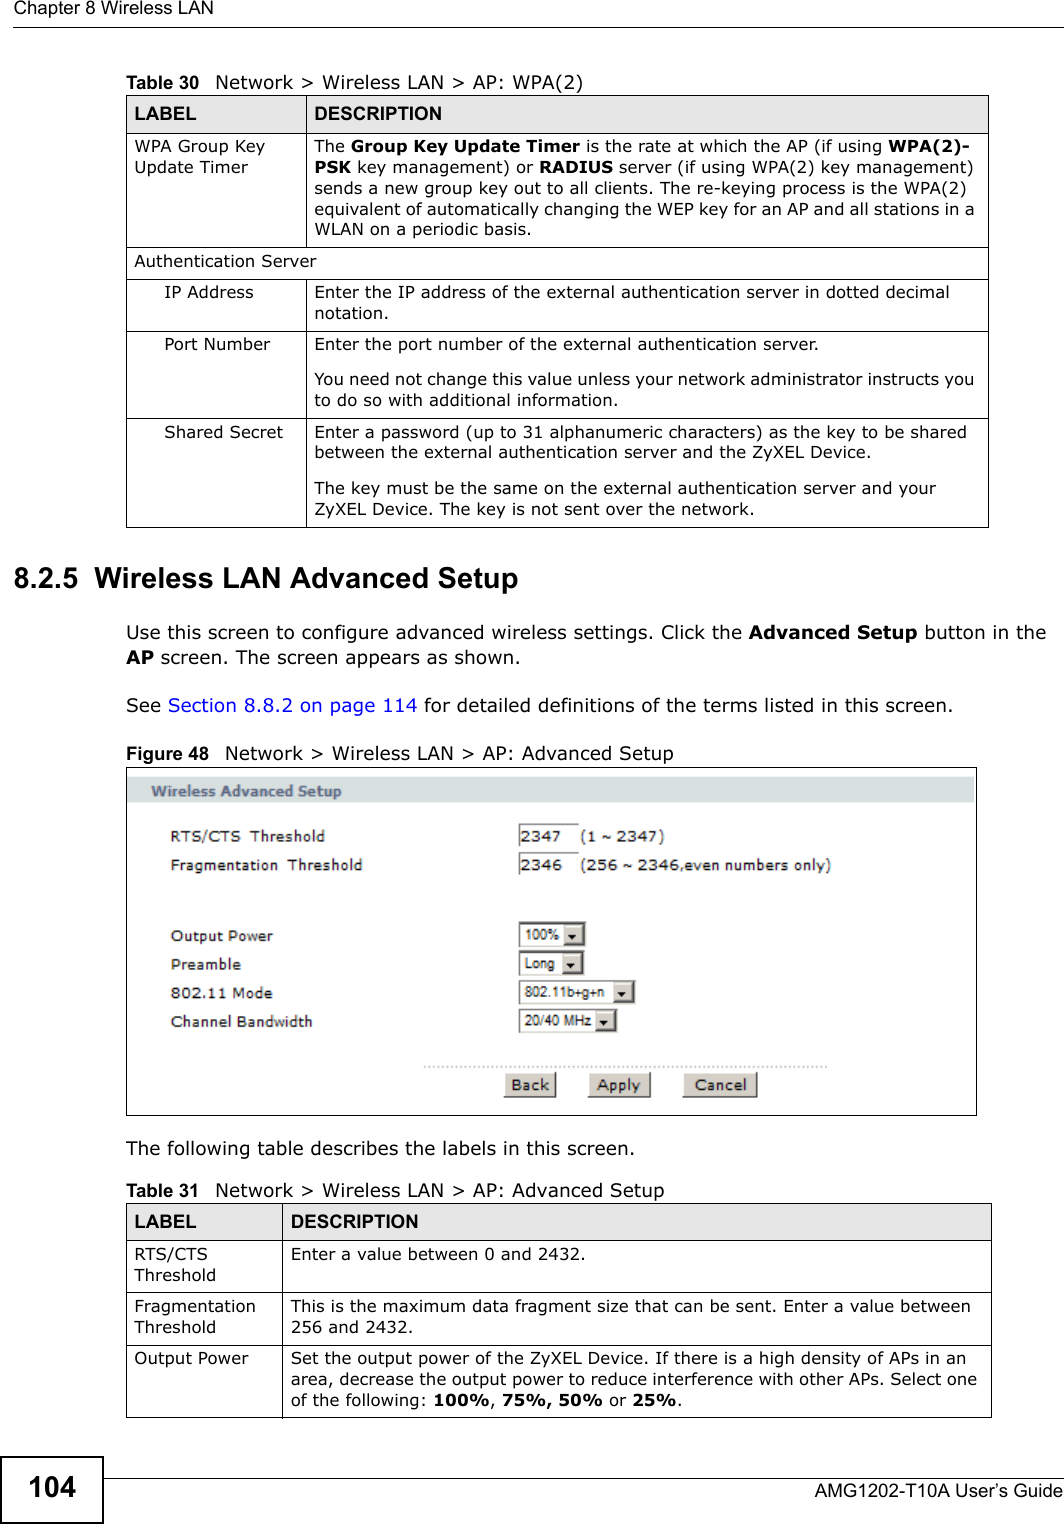 Chapter 8 Wireless LANAMG1202-T10A User’s Guide1048.2.5  Wireless LAN Advanced SetupUse this screen to configure advanced wireless settings. Click the Advanced Setup button in the AP screen. The screen appears as shown.See Section 8.8.2 on page 114 for detailed definitions of the terms listed in this screen.Figure 48   Network &gt; Wireless LAN &gt; AP: Advanced SetupThe following table describes the labels in this screen. WPA Group Key Update TimerThe Group Key Update Timer is the rate at which the AP (if using WPA(2)-PSK key management) or RADIUS server (if using WPA(2) key management) sends a new group key out to all clients. The re-keying process is the WPA(2) equivalent of automatically changing the WEP key for an AP and all stations in a WLAN on a periodic basis.Authentication ServerIP Address Enter the IP address of the external authentication server in dotted decimal notation.Port Number Enter the port number of the external authentication server.You need not change this value unless your network administrator instructs you to do so with additional information. Shared Secret Enter a password (up to 31 alphanumeric characters) as the key to be shared between the external authentication server and the ZyXEL Device.The key must be the same on the external authentication server and your ZyXEL Device. The key is not sent over the network. Table 30   Network &gt; Wireless LAN &gt; AP: WPA(2)LABEL DESCRIPTIONTable 31   Network &gt; Wireless LAN &gt; AP: Advanced SetupLABEL DESCRIPTIONRTS/CTS ThresholdEnter a value between 0 and 2432. Fragmentation ThresholdThis is the maximum data fragment size that can be sent. Enter a value between 256 and 2432. Output Power Set the output power of the ZyXEL Device. If there is a high density of APs in an area, decrease the output power to reduce interference with other APs. Select one of the following: 100%, 75%, 50% or 25%. 